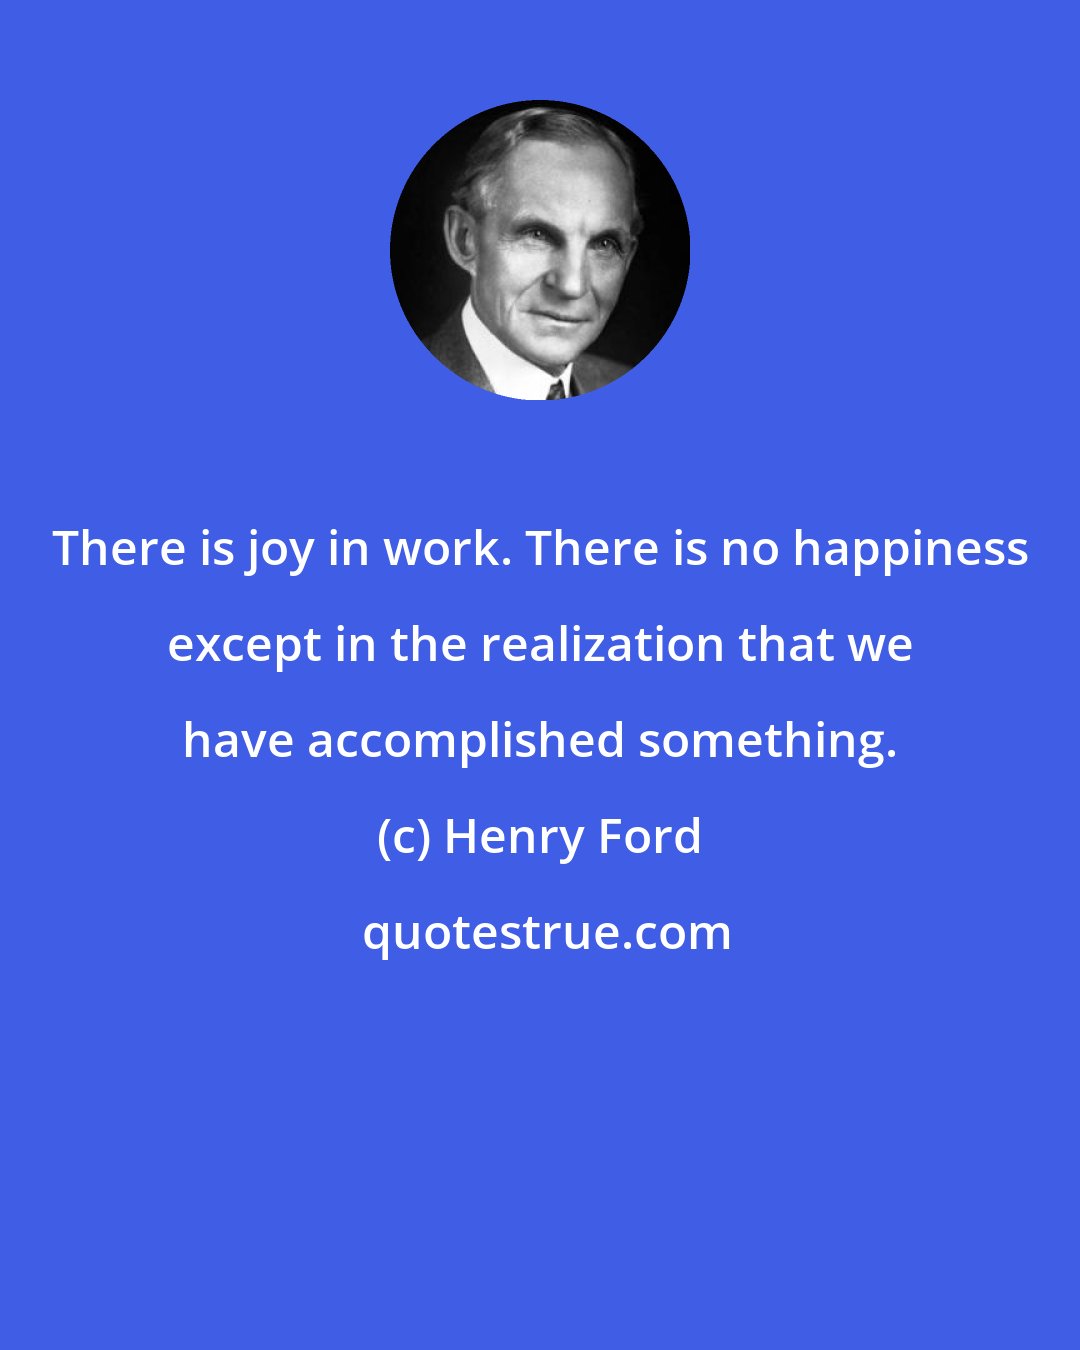 Henry Ford: There is joy in work. There is no happiness except in the realization that we have accomplished something.